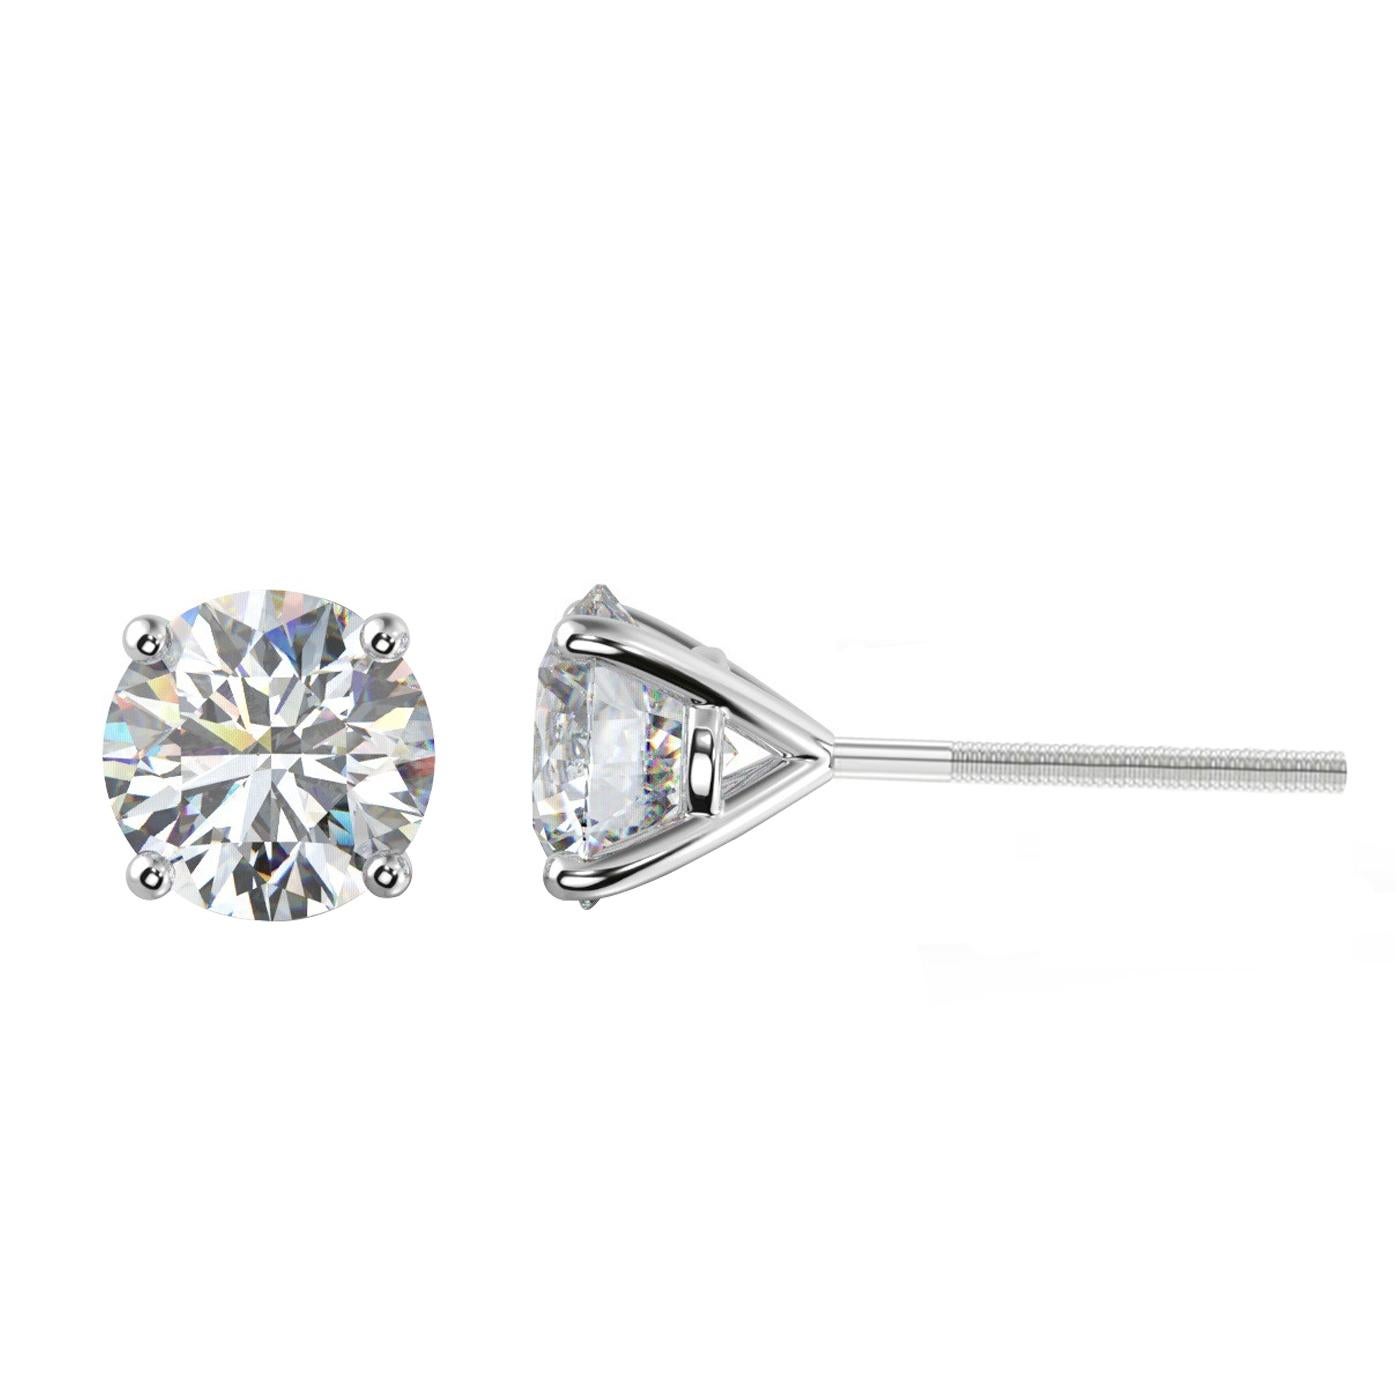 A MUST-HAVE pair of 4.74-carat diamond Stud Earrings. Elegant beautiful 4-prong Martini style setting holds round cut diamonds. All diamonds are natural, These Earrings Feature H Color Grade and Si2 / Si3 Clarity Grade with 8.38mm - 8.40mm on one